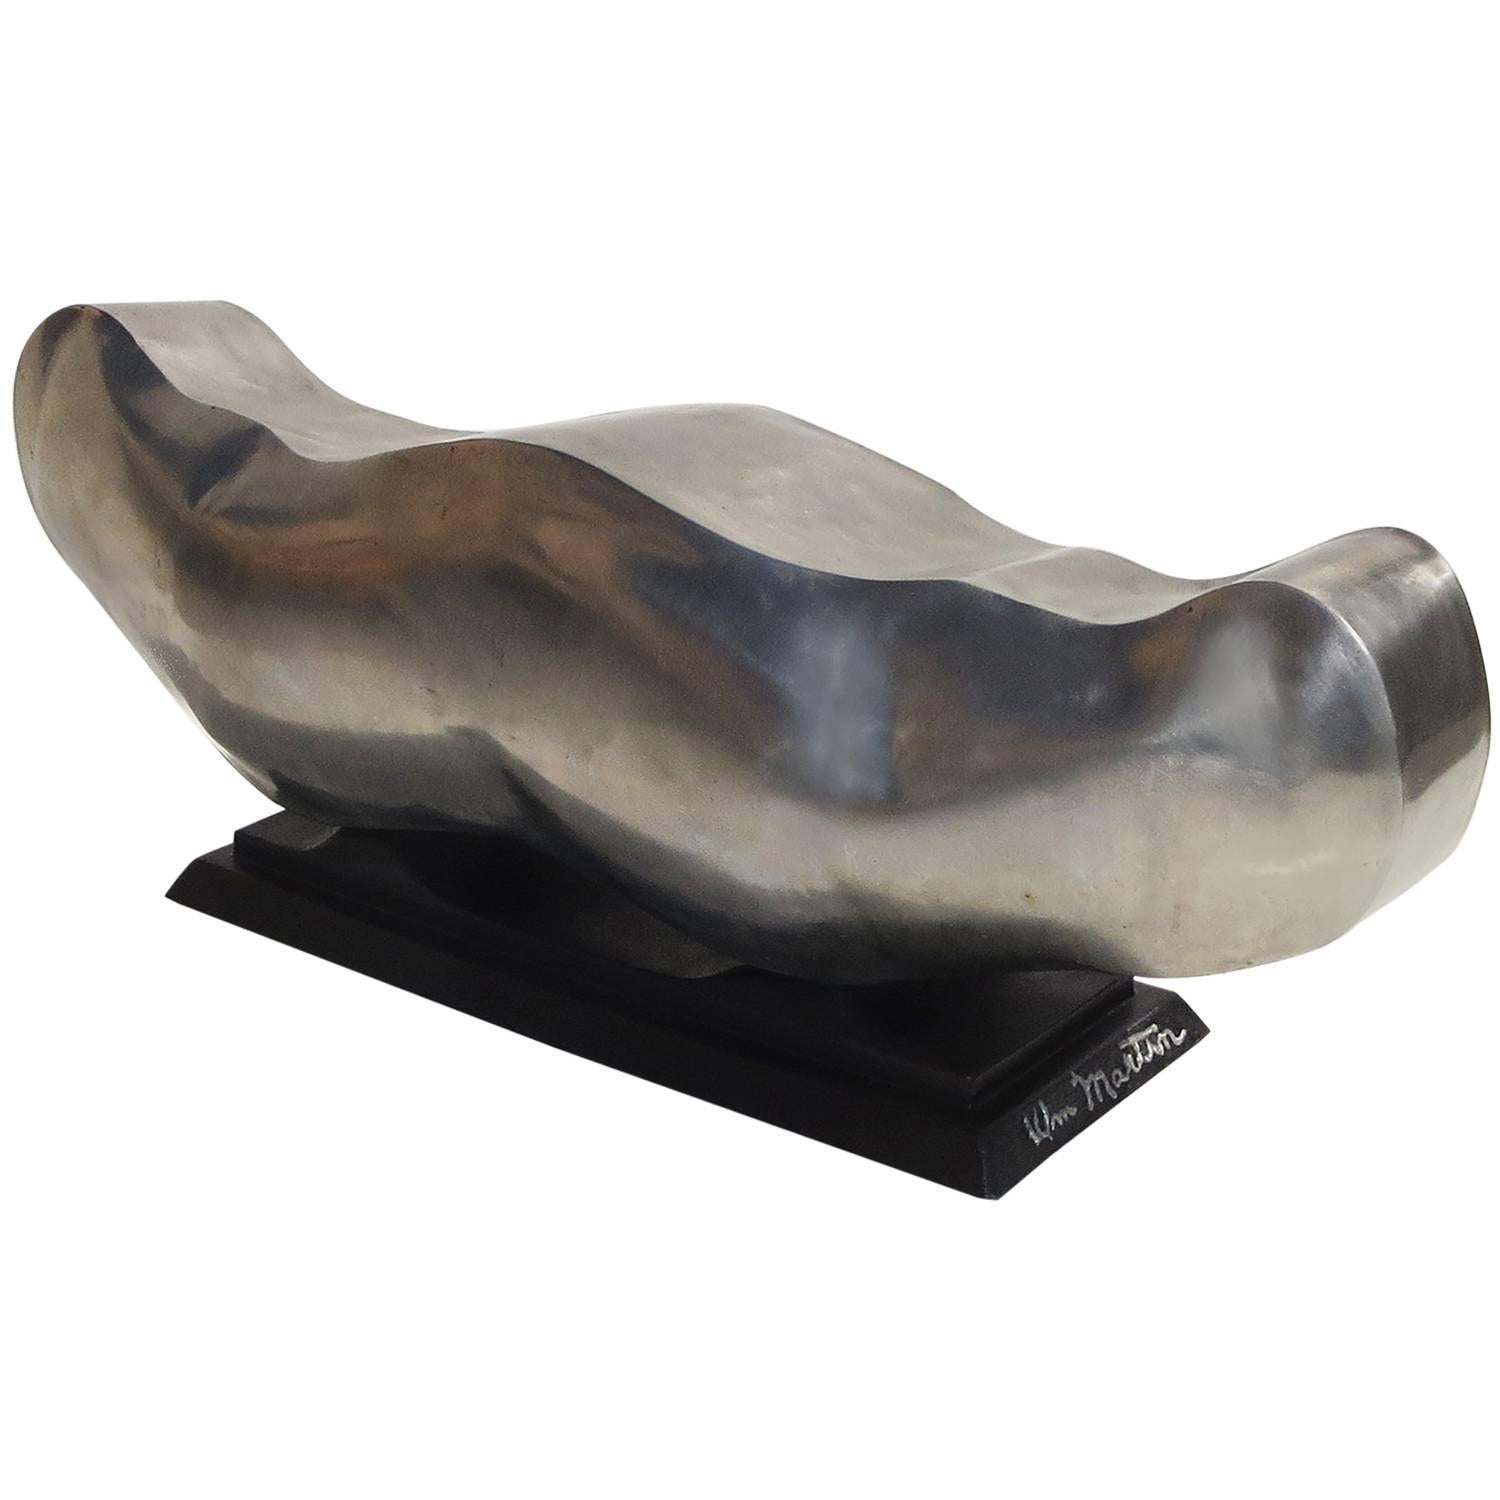 Freeform Polished Steel Sculpture by William Martin, 1975